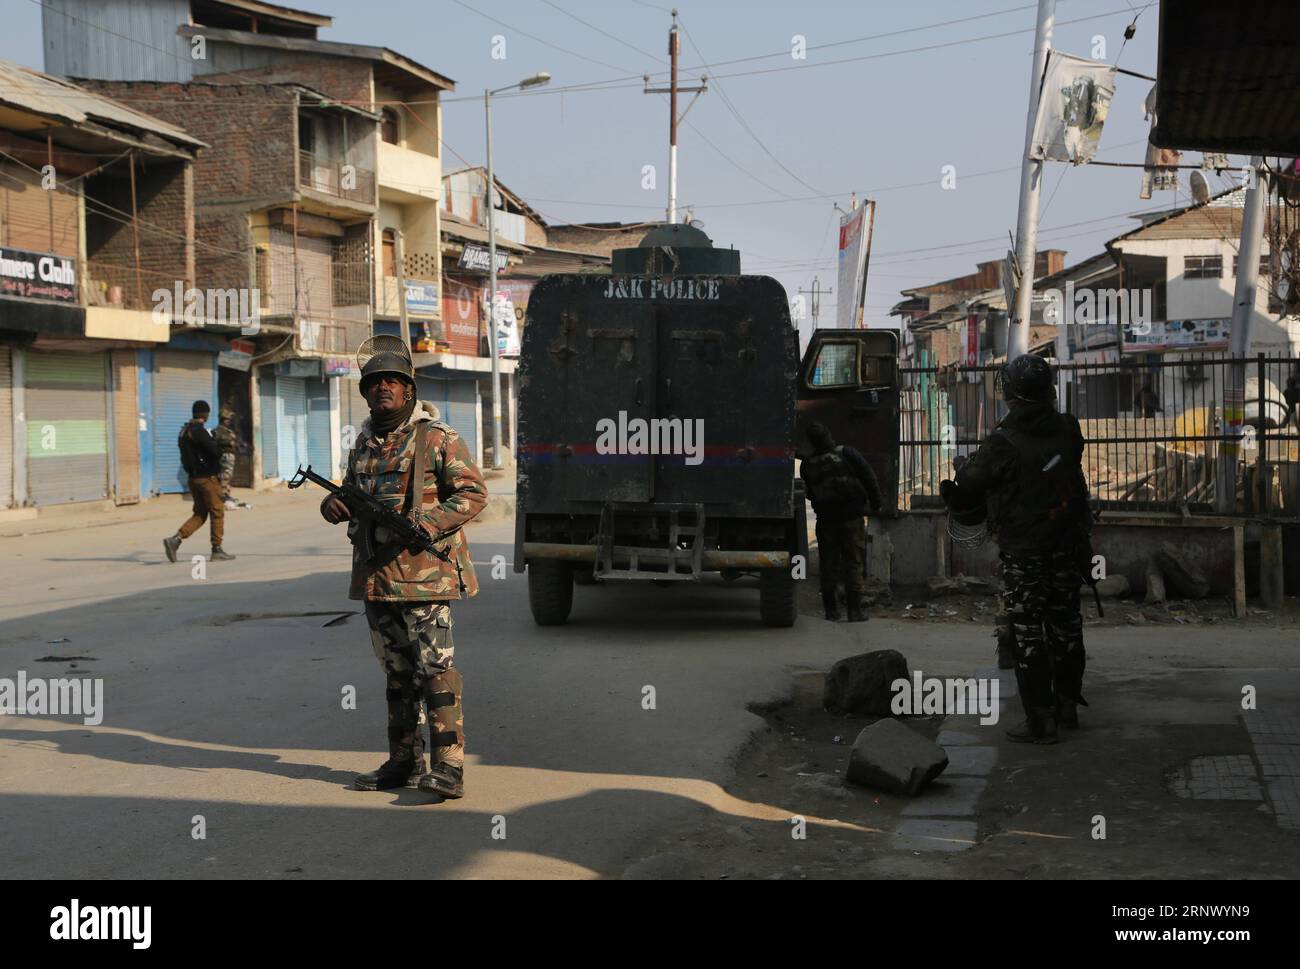 (180106) -- SOPORE, Jan. 6, 2018 -- Indian police and paramilitary troopers stand guard near the site of an improvised explosive device (IED) blast in Sopore town of Baramulla district, about 50 km northwest of Srinagar city, the summer capital of Indian-controlled Kashmir, on Jan. 6, 2018. At least four policemen were killed and two others wounded Saturday after militants triggered an improvised explosive device (IED) blast in restive Indian-controlled Kashmir, police said. ) (whw) INDIAN-CONTROLLED KASHMIR-SOPORE-BLAST JavedxDar PUBLICATIONxNOTxINxCHN Stock Photo